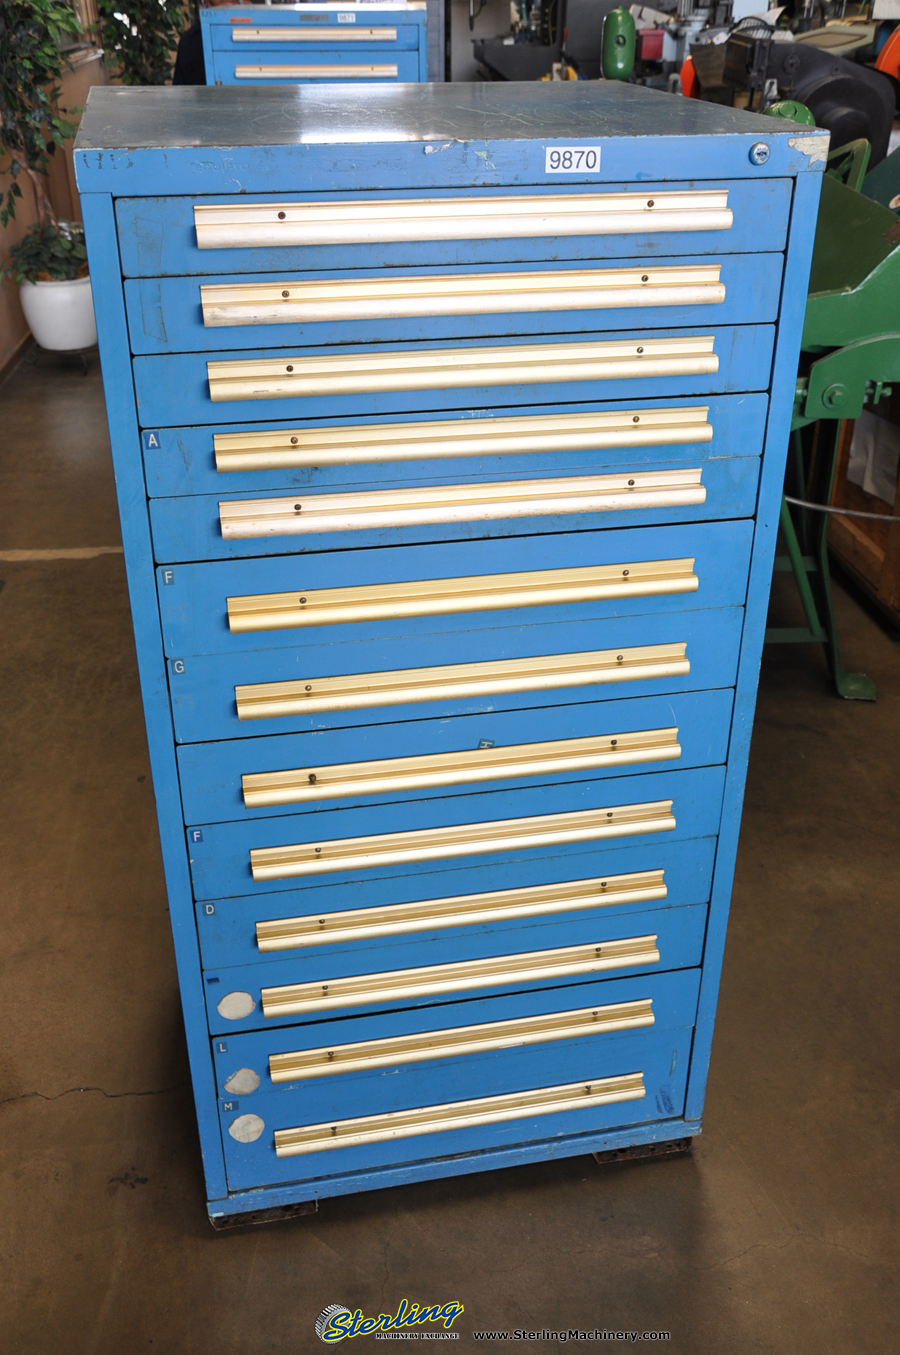 For Sale: Used Equipto Cabinet, Five Drawers 25